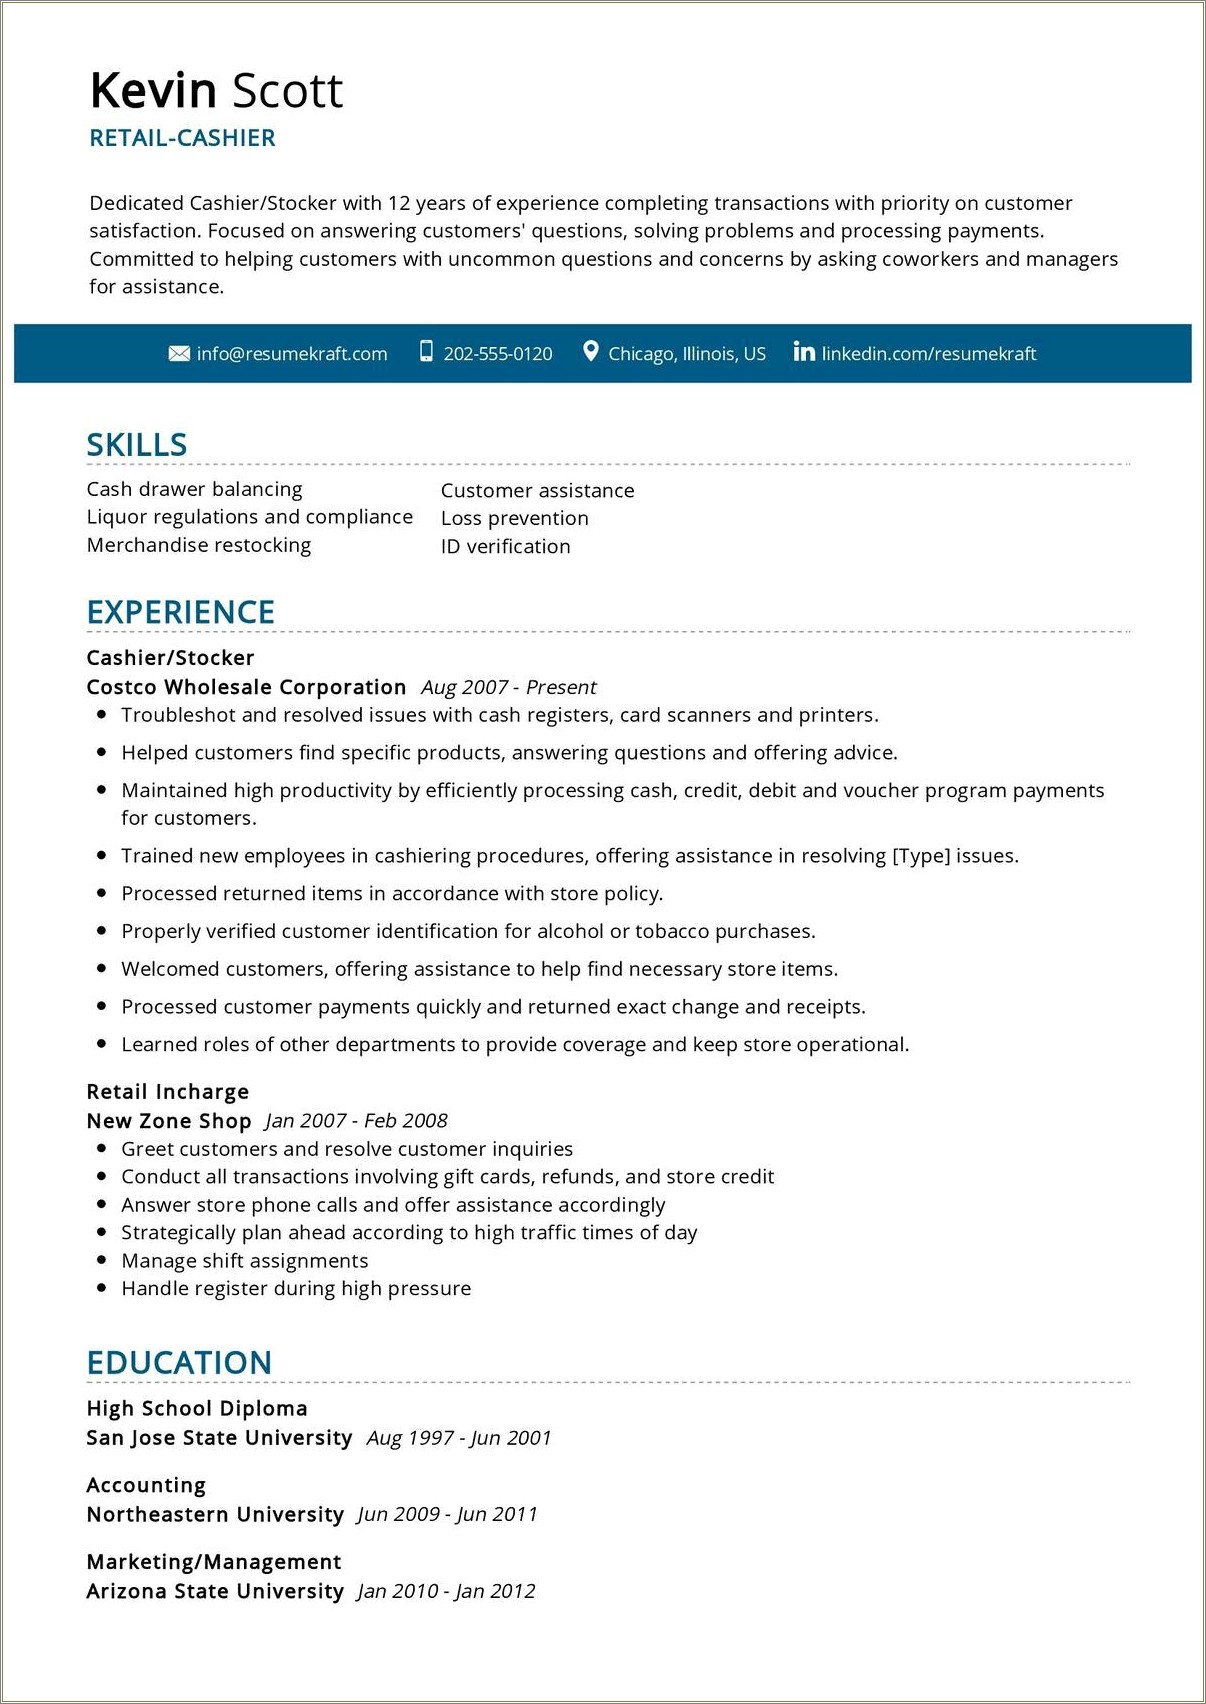 Work Experience For Cashiers On A Resume